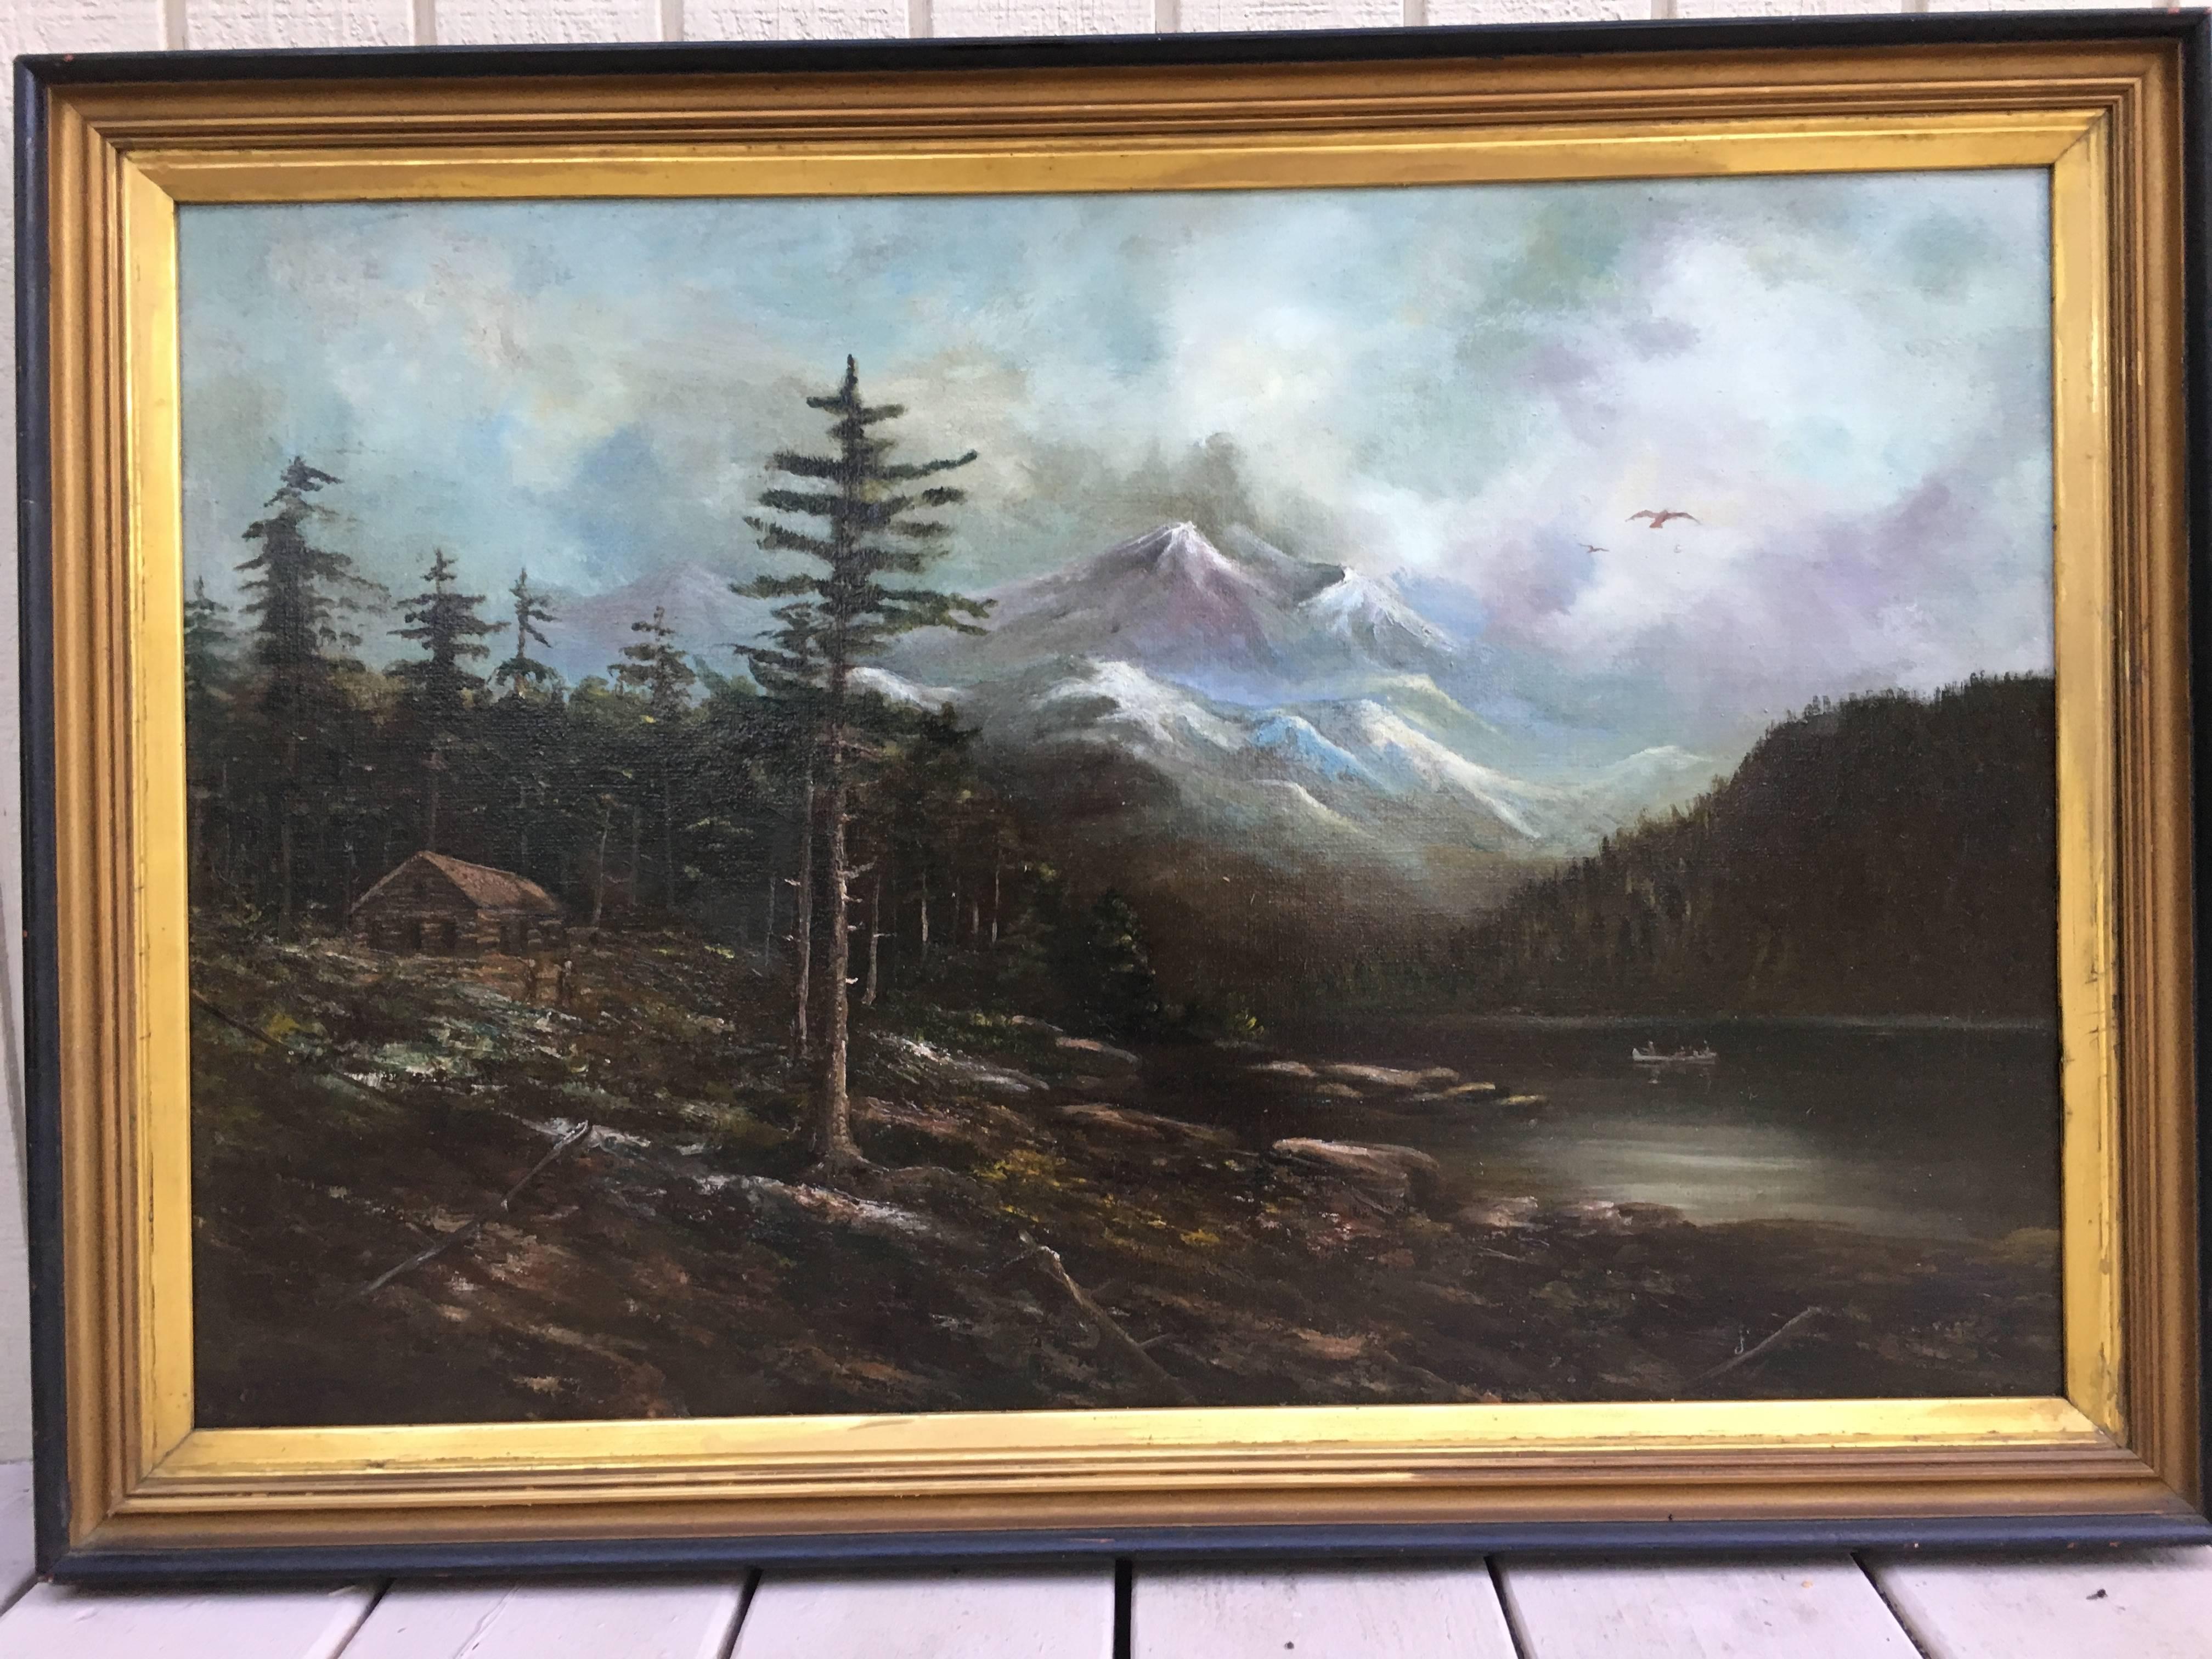 Canadian High Mountains - Painting by Octavius White